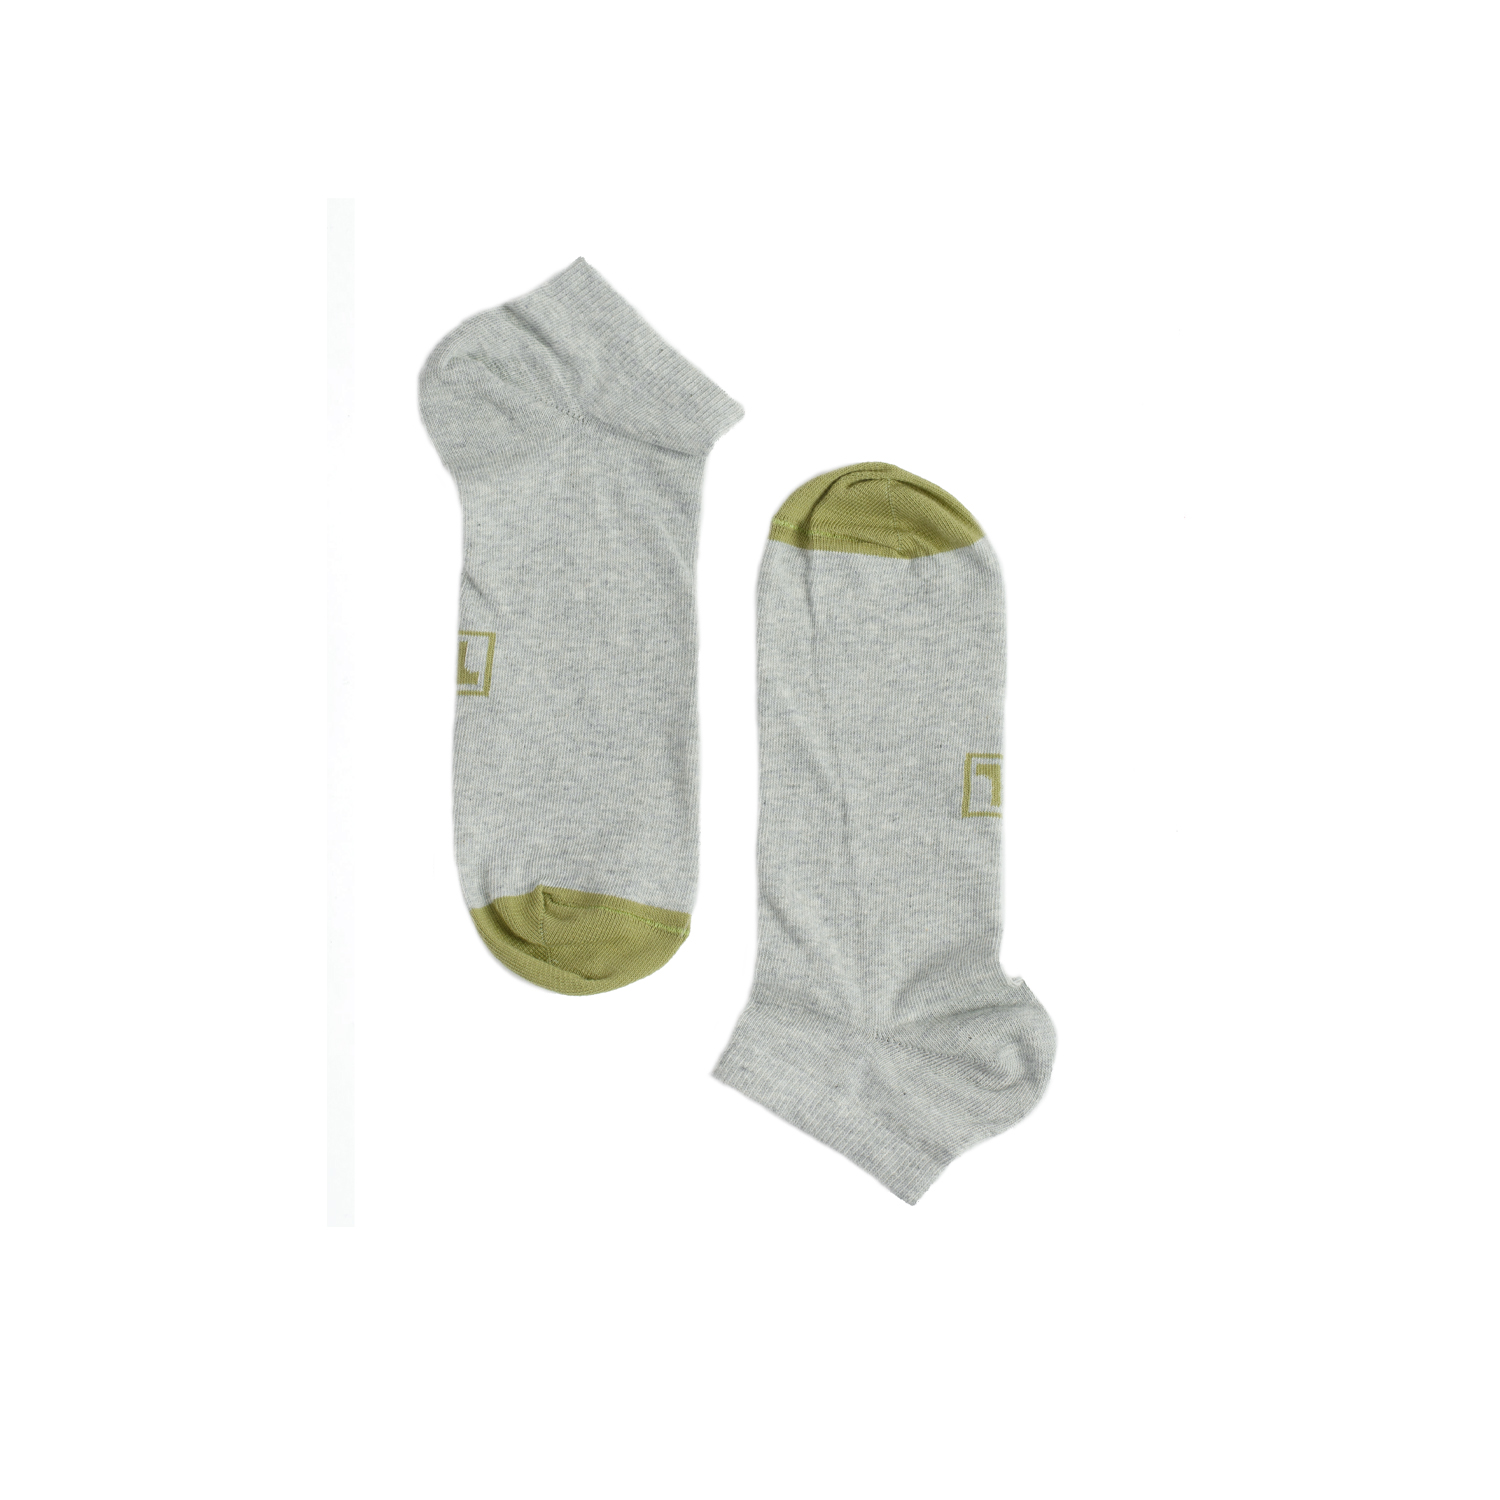 Tisza shoes- Socks- T Gray-spinach